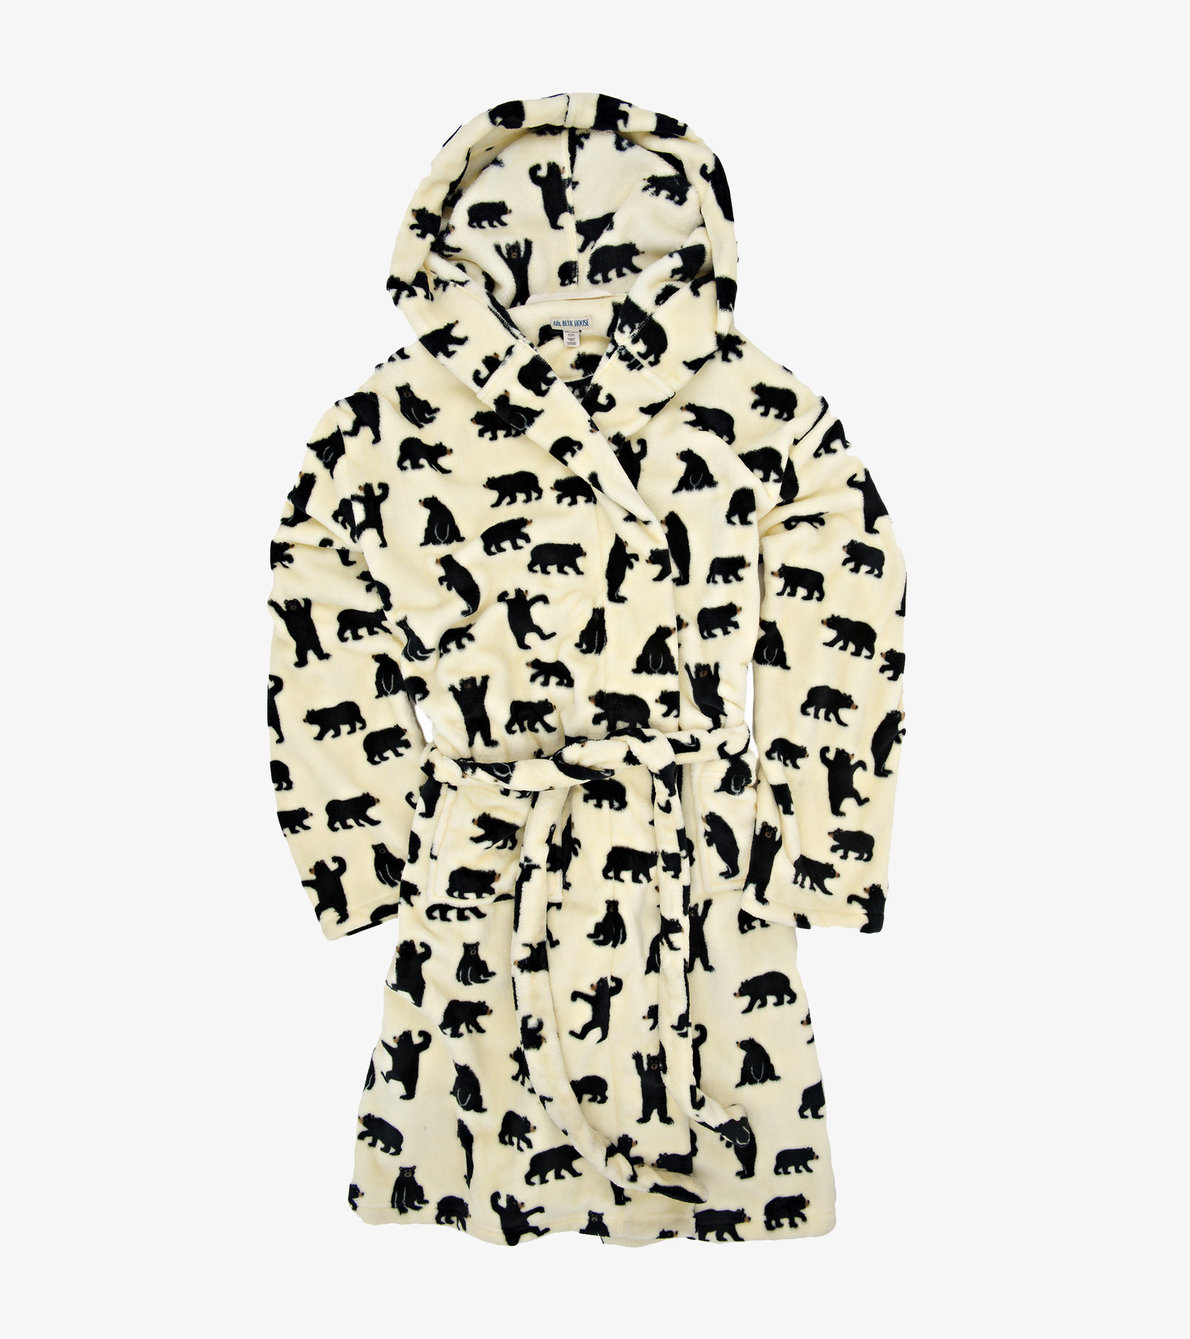 View larger image of Black Bears on Natural Adult Fleece Robe